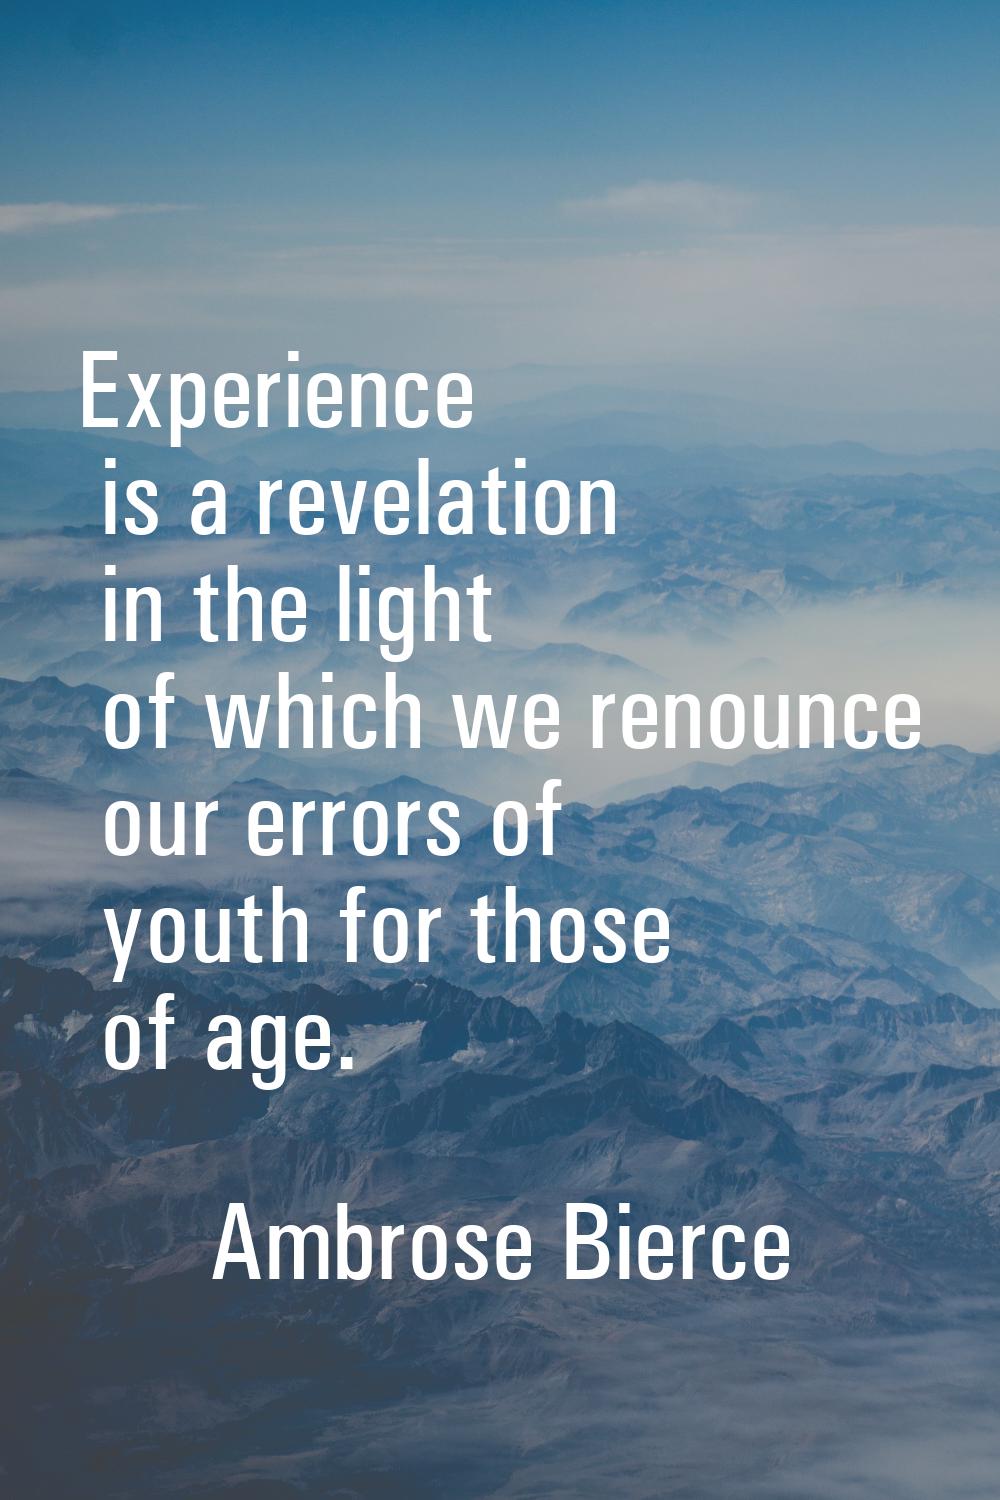 Experience is a revelation in the light of which we renounce our errors of youth for those of age.